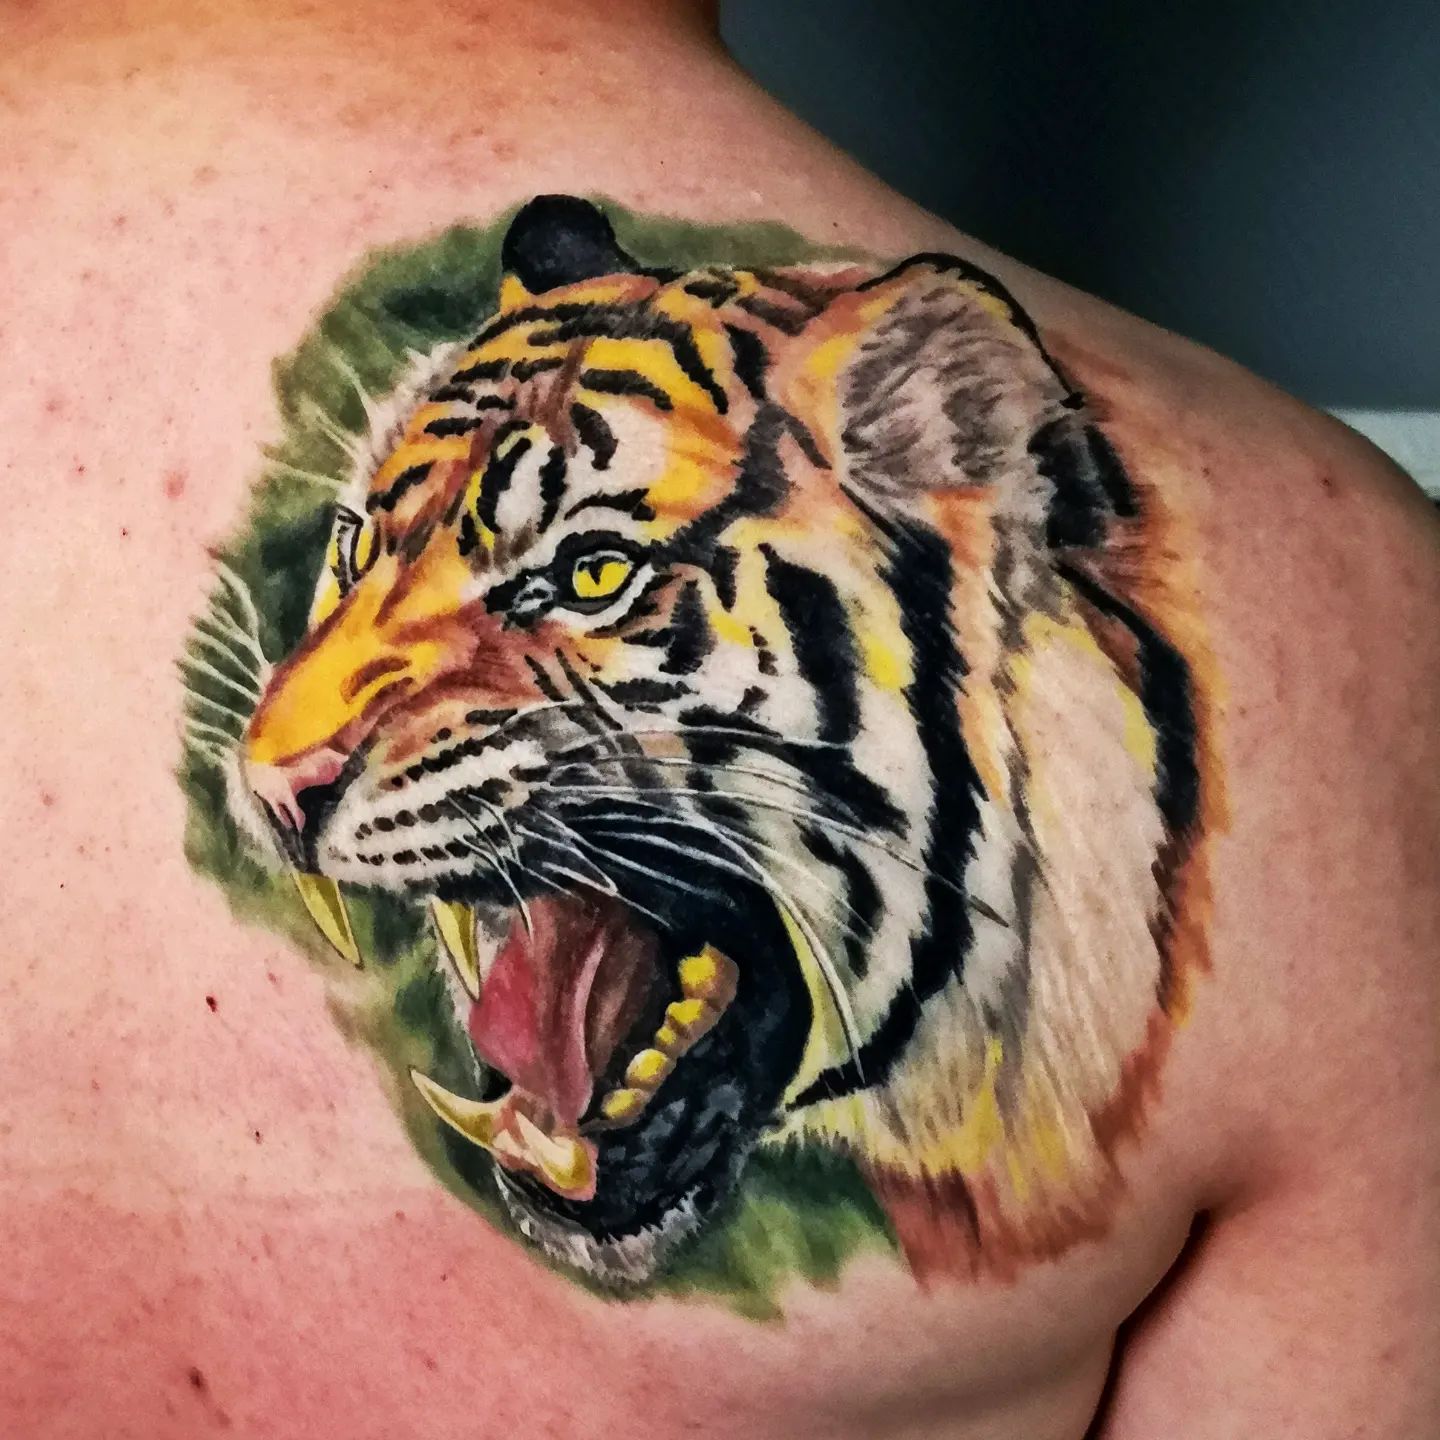 If there’s a tiger within you waiting to rise and shine + you’re someone who likes fierce bold symbols, give it a go with this tiger tattoo.